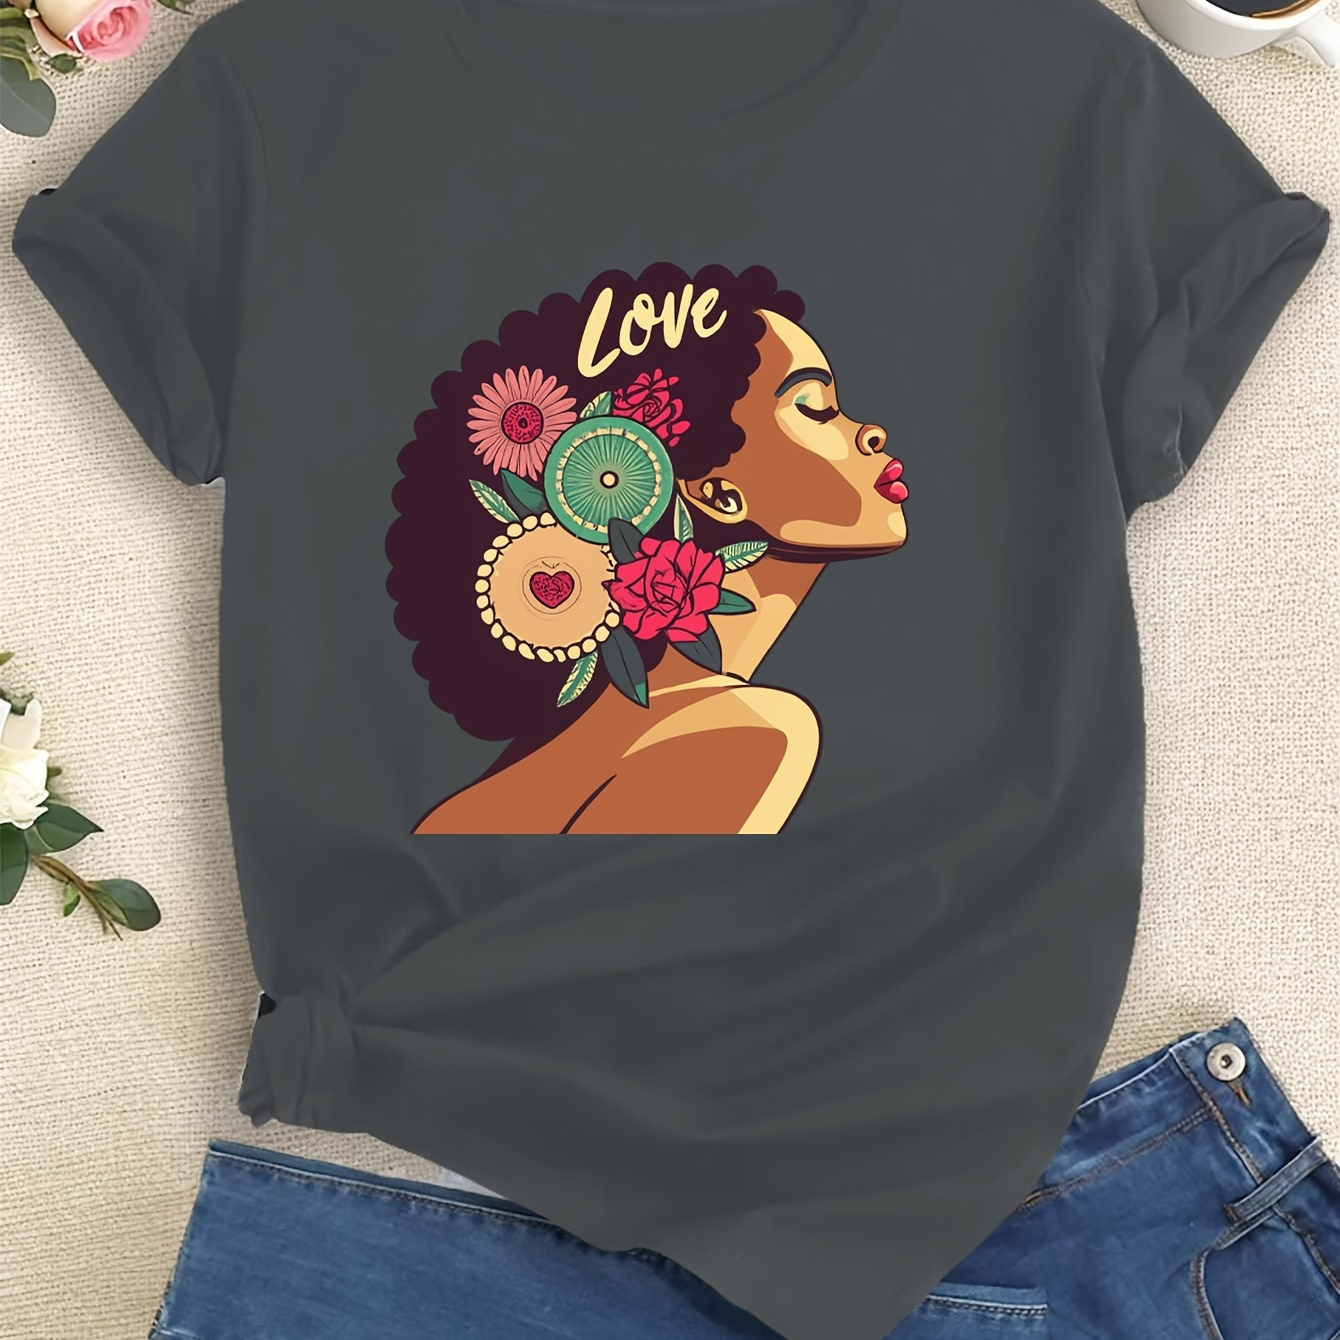 

Afro Love, Worthy, Self Love Print T-shirt, Short Sleeve Crew Neck Casual Top For Summer & Spring, Women's Clothing